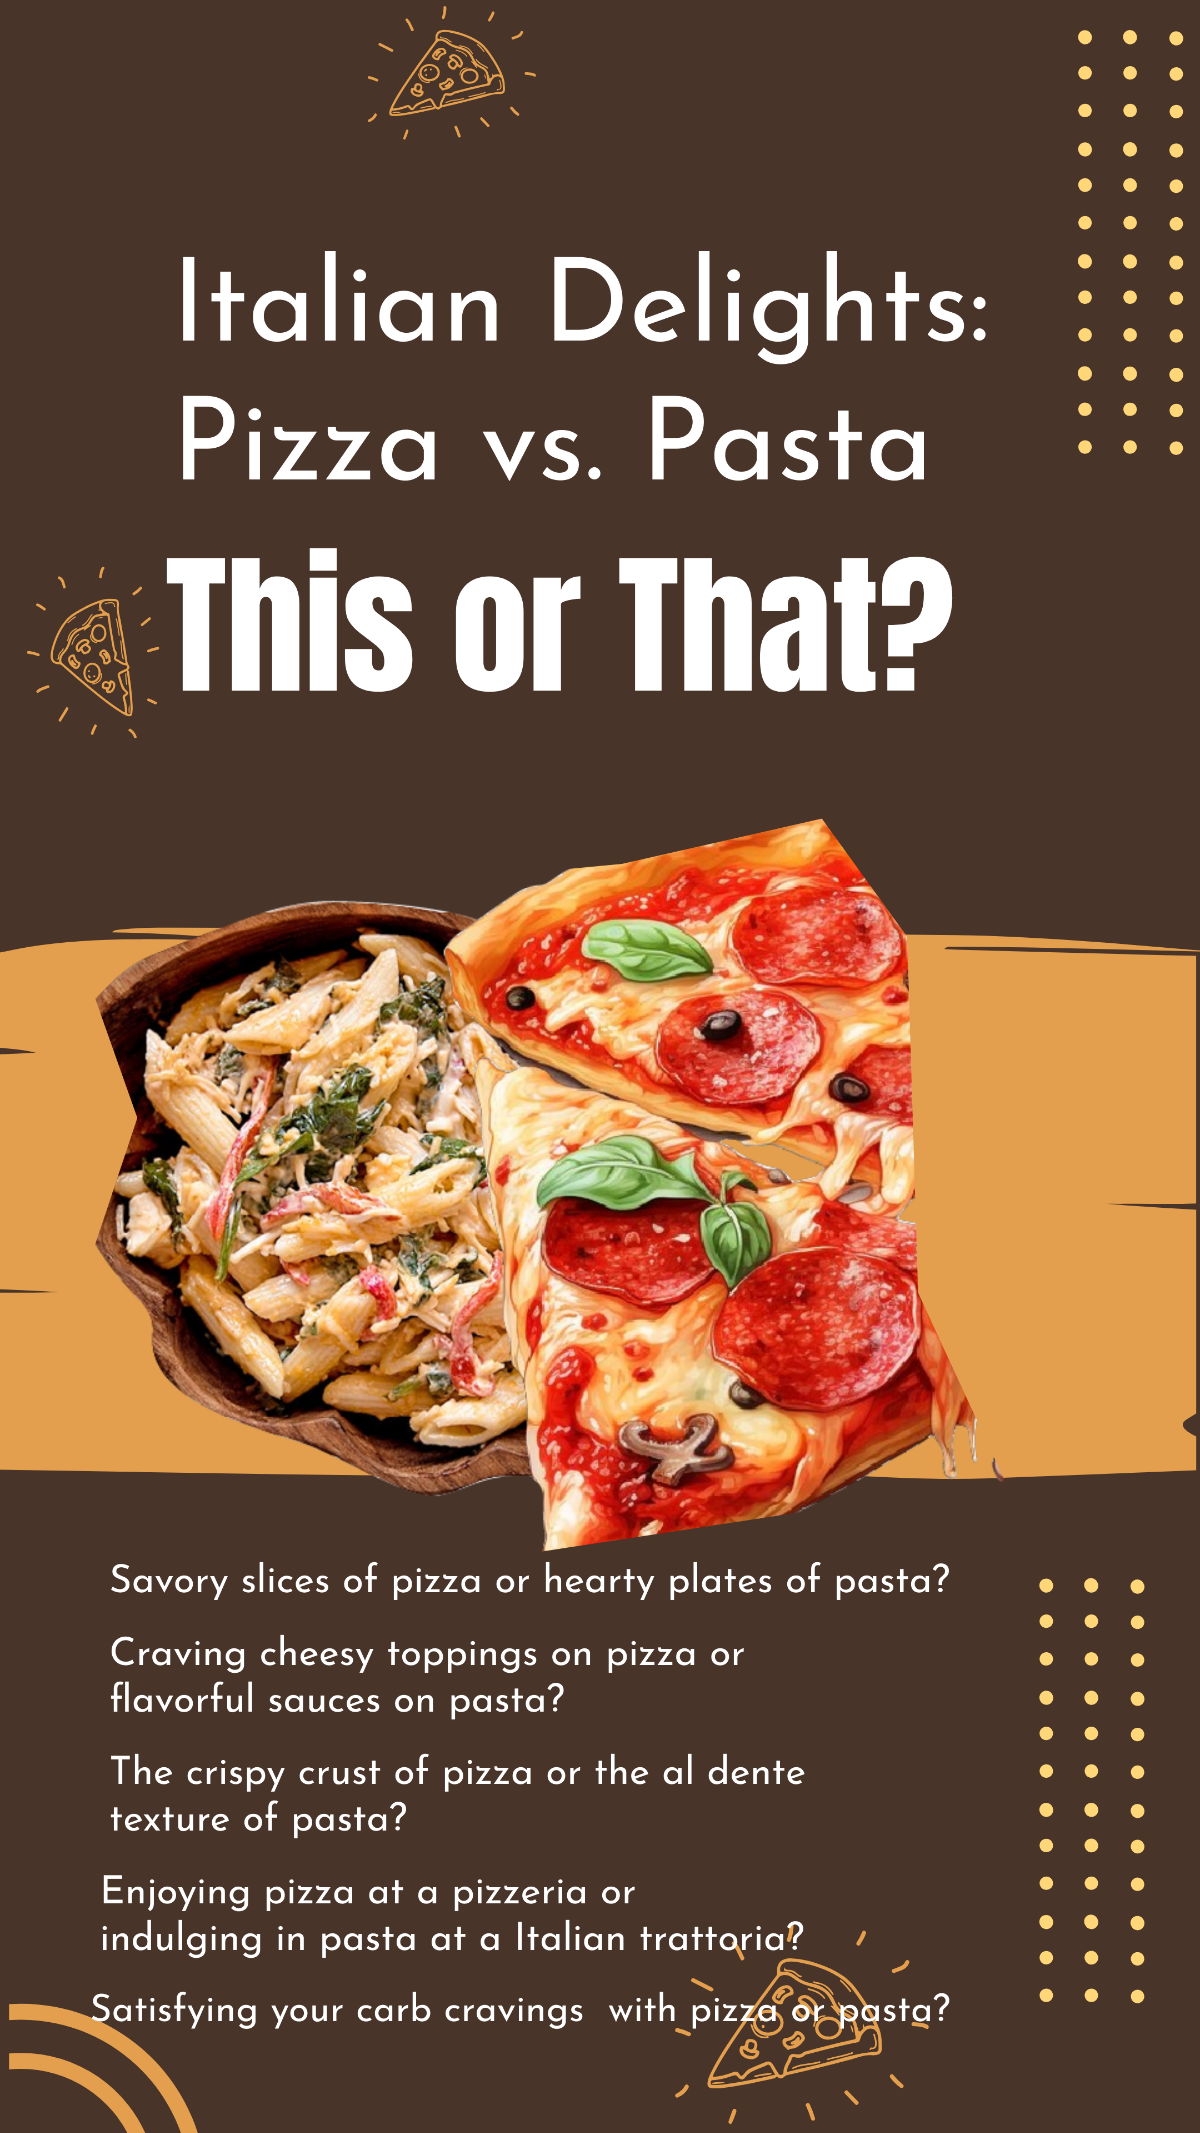 Free Pizza or Pasta This or That Instagram Story Template